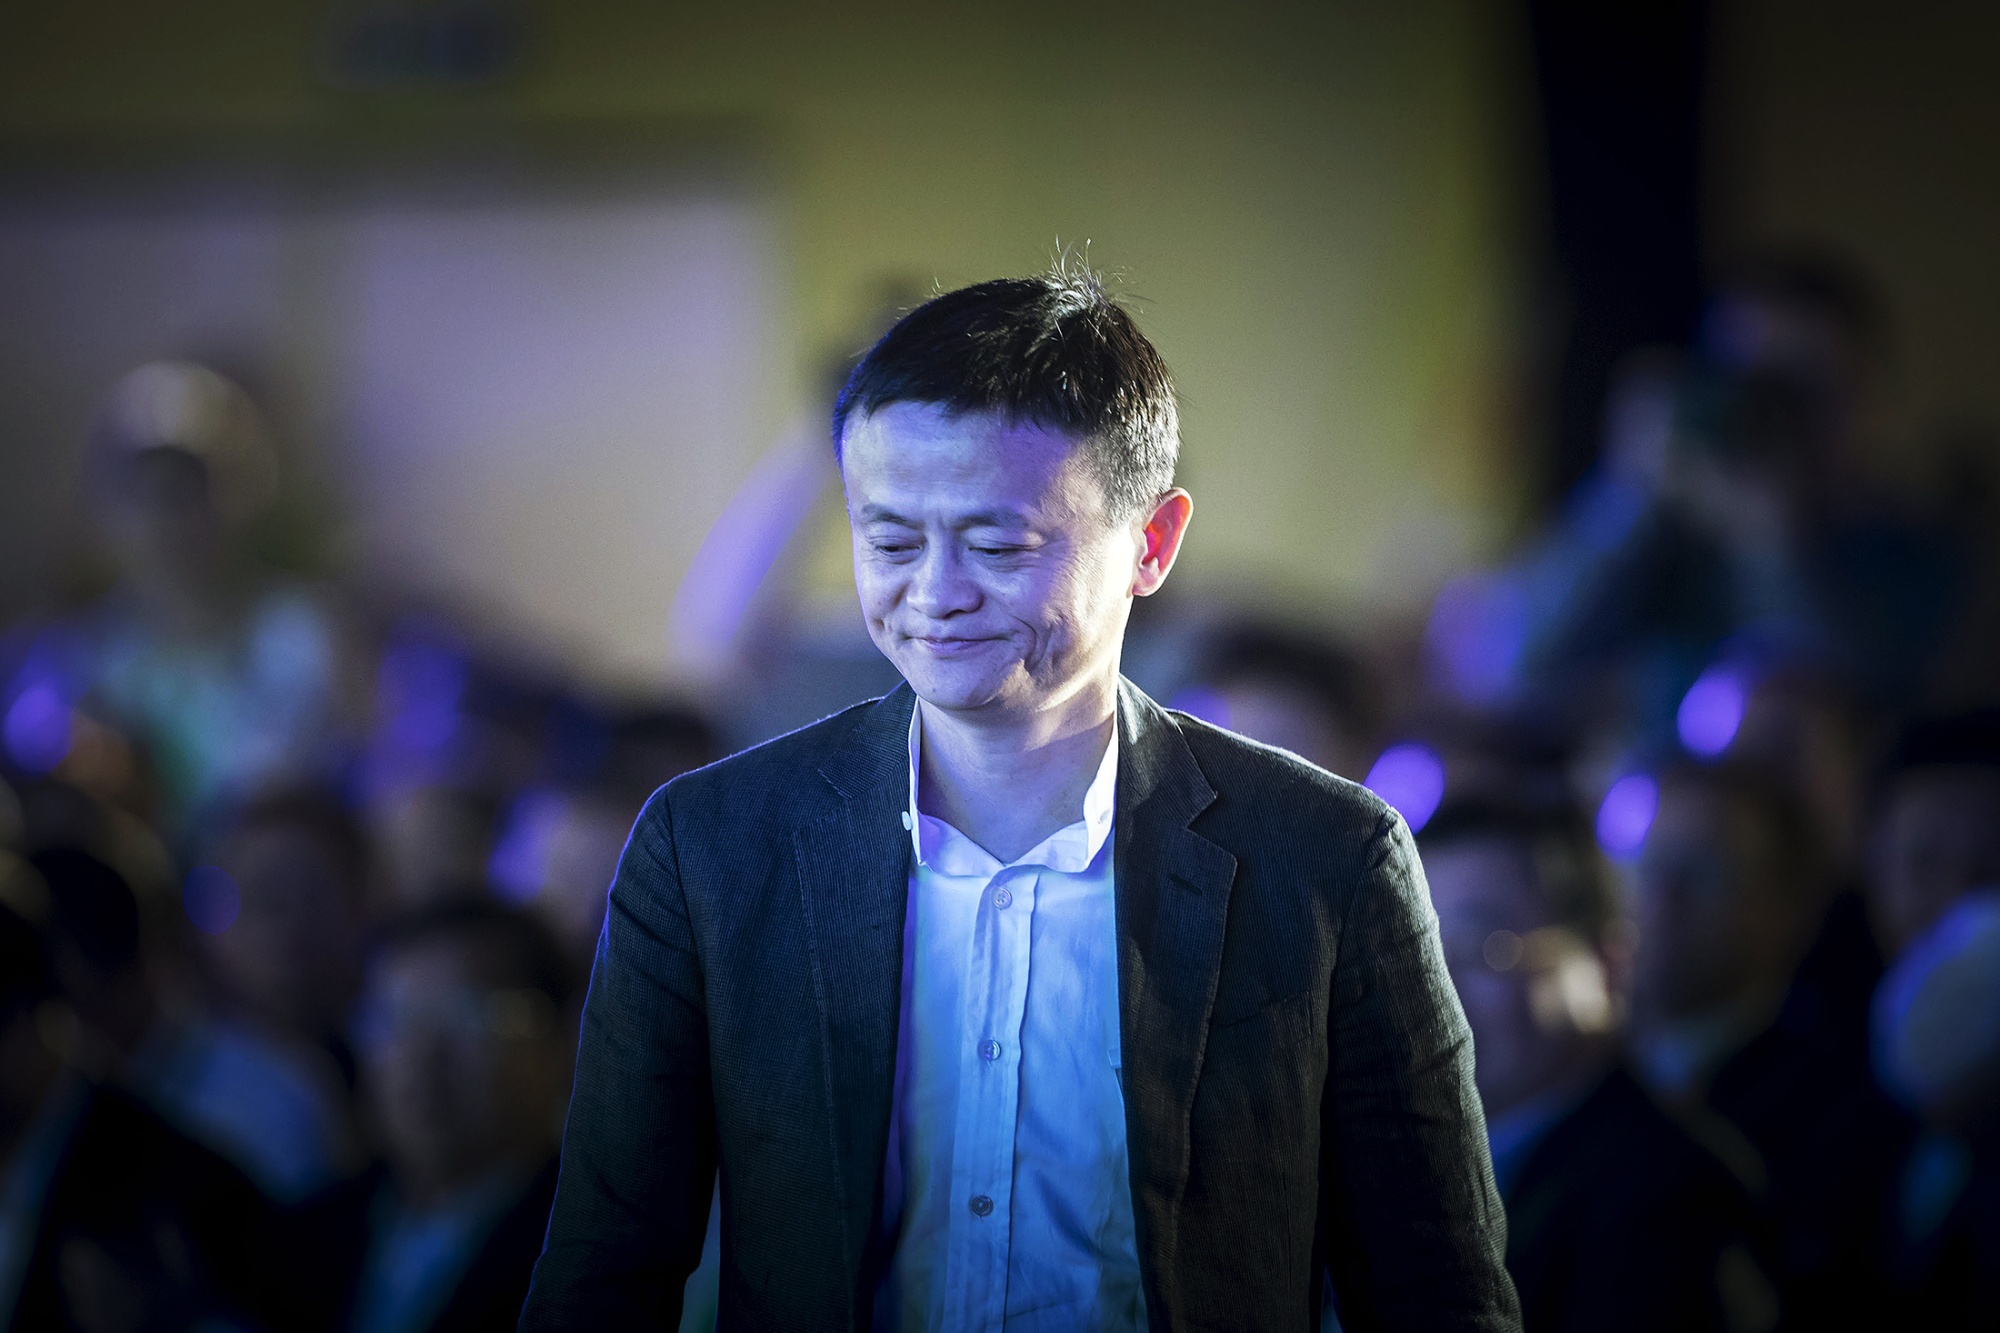 Jack’s back? A&nbsp;sighting in China precedes the breakup of Alibaba into six offspring.